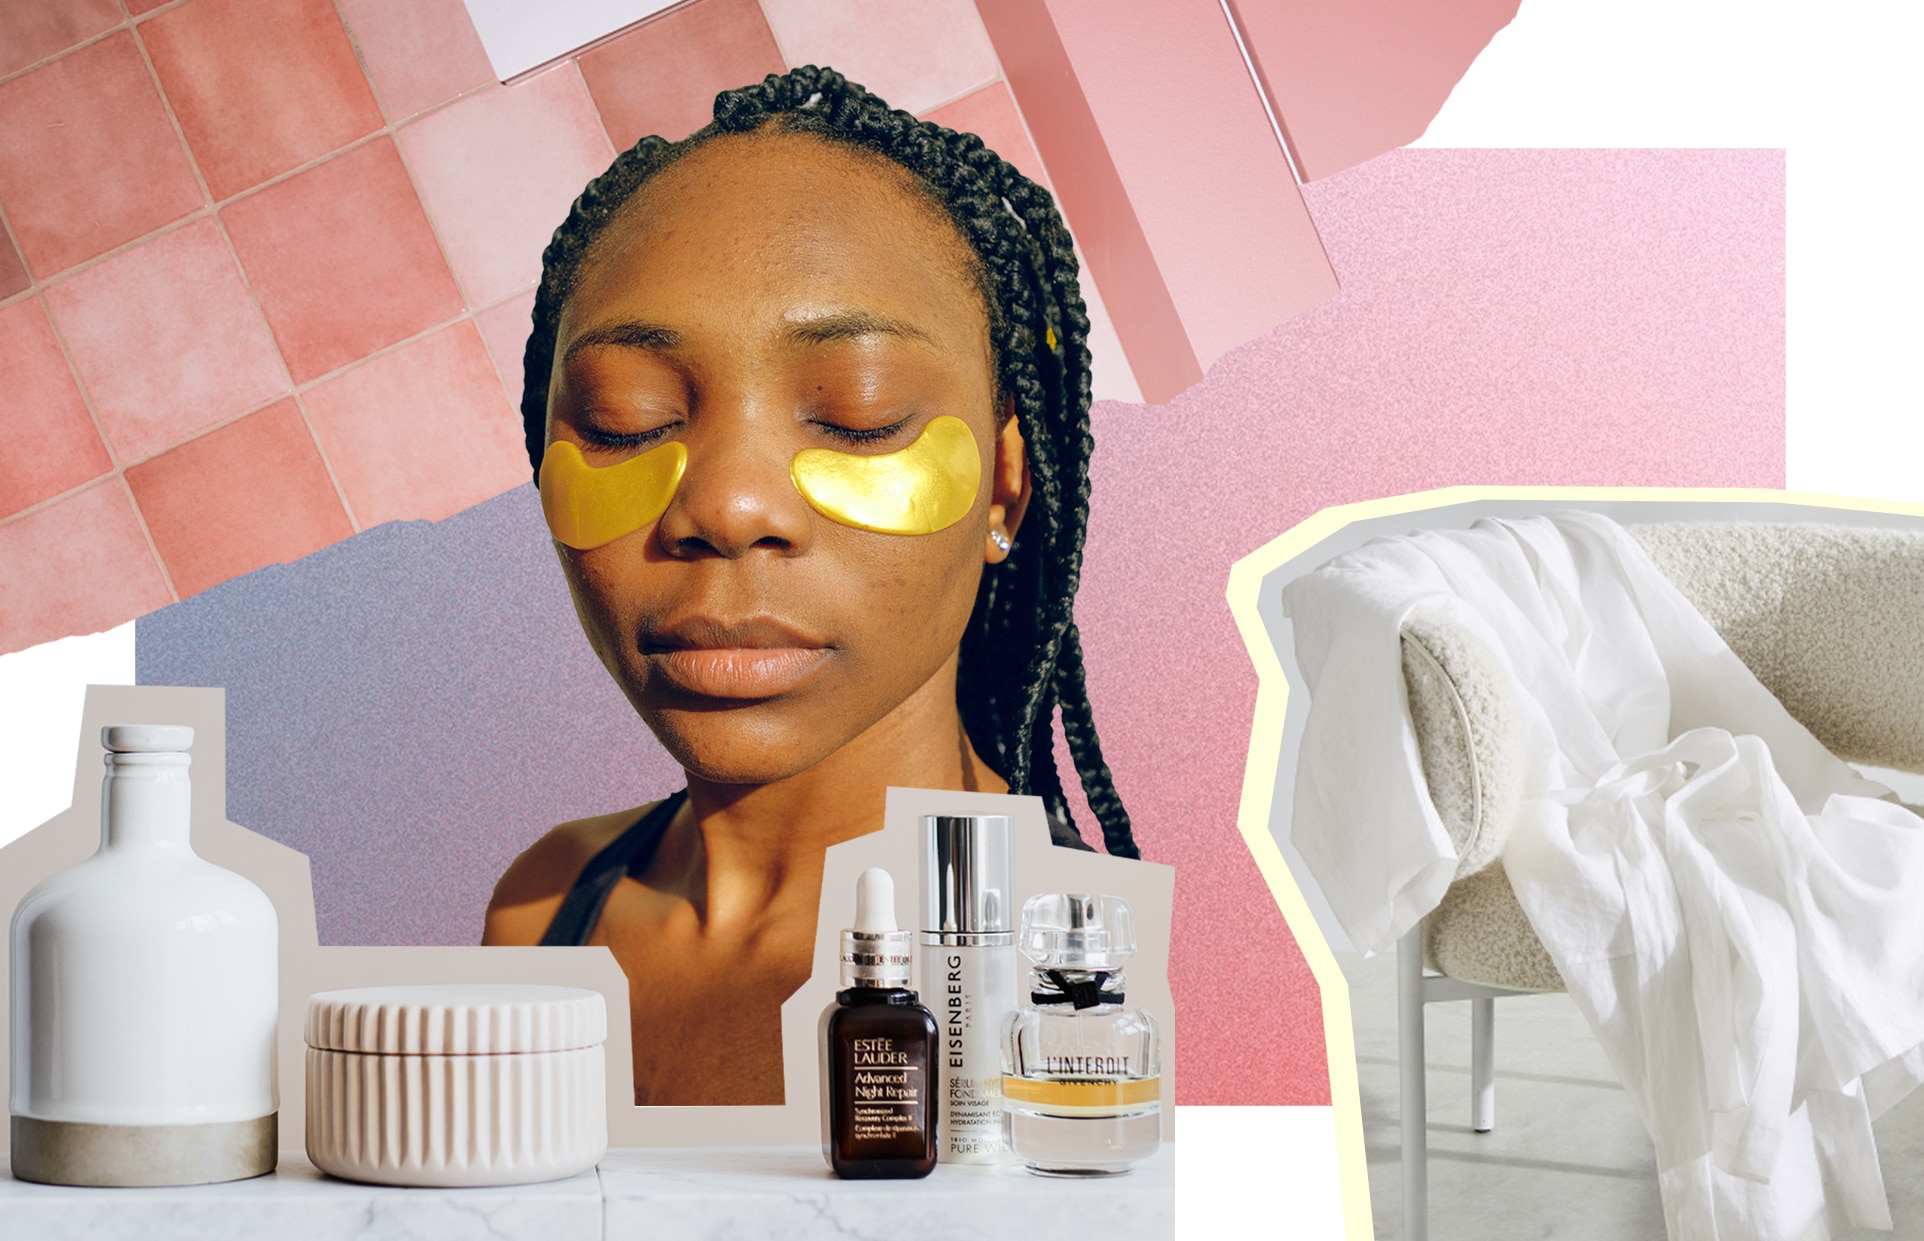 collage for rinsing ritual home decor 2023 trend. includes black woman with braids, wearing gold under eye patches. pink bathroom tiles in the background, skincare in foreground, abbotson linen loungewear on couch.